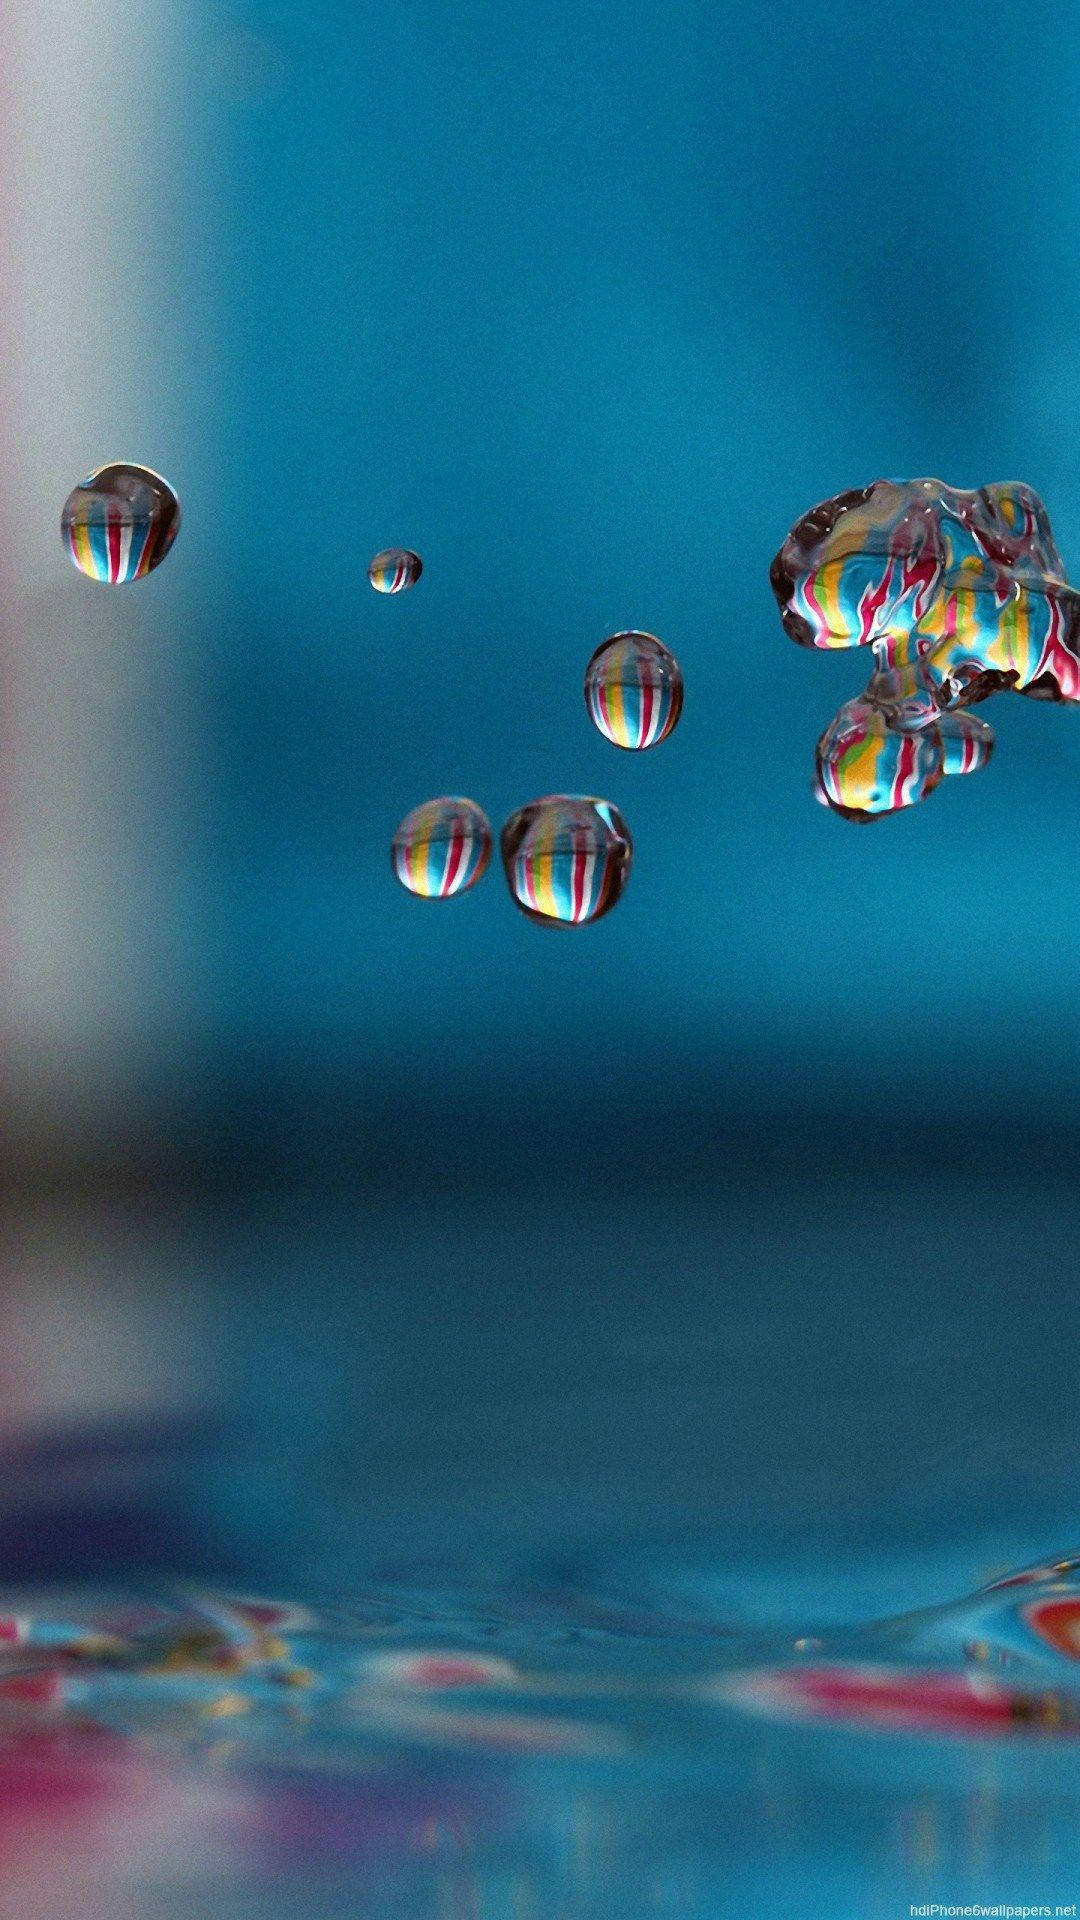 Floating Water Droplets Iphone 8 Live Wallpaper